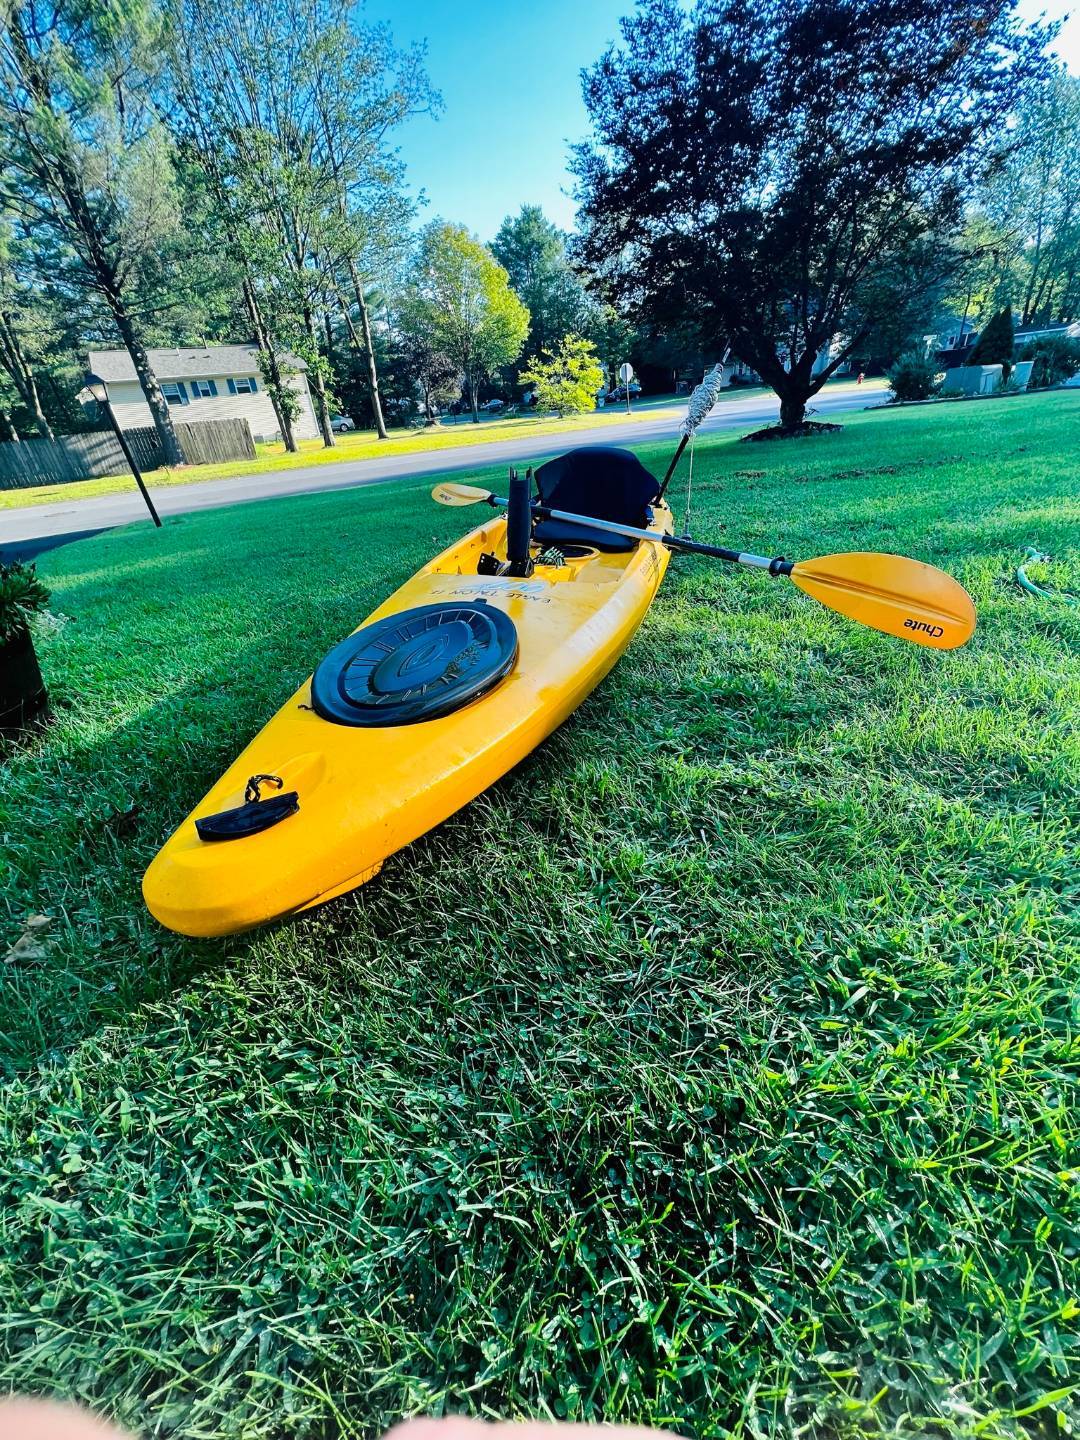 Field and Stream Eagle Talon 12' Fishing Kayak with Extras - Non Hunting  Items For Sale and Trade - Hunting New York - NY Empire State Hunting Forum  - Bow Hunting, Fishing, Bear, Deer